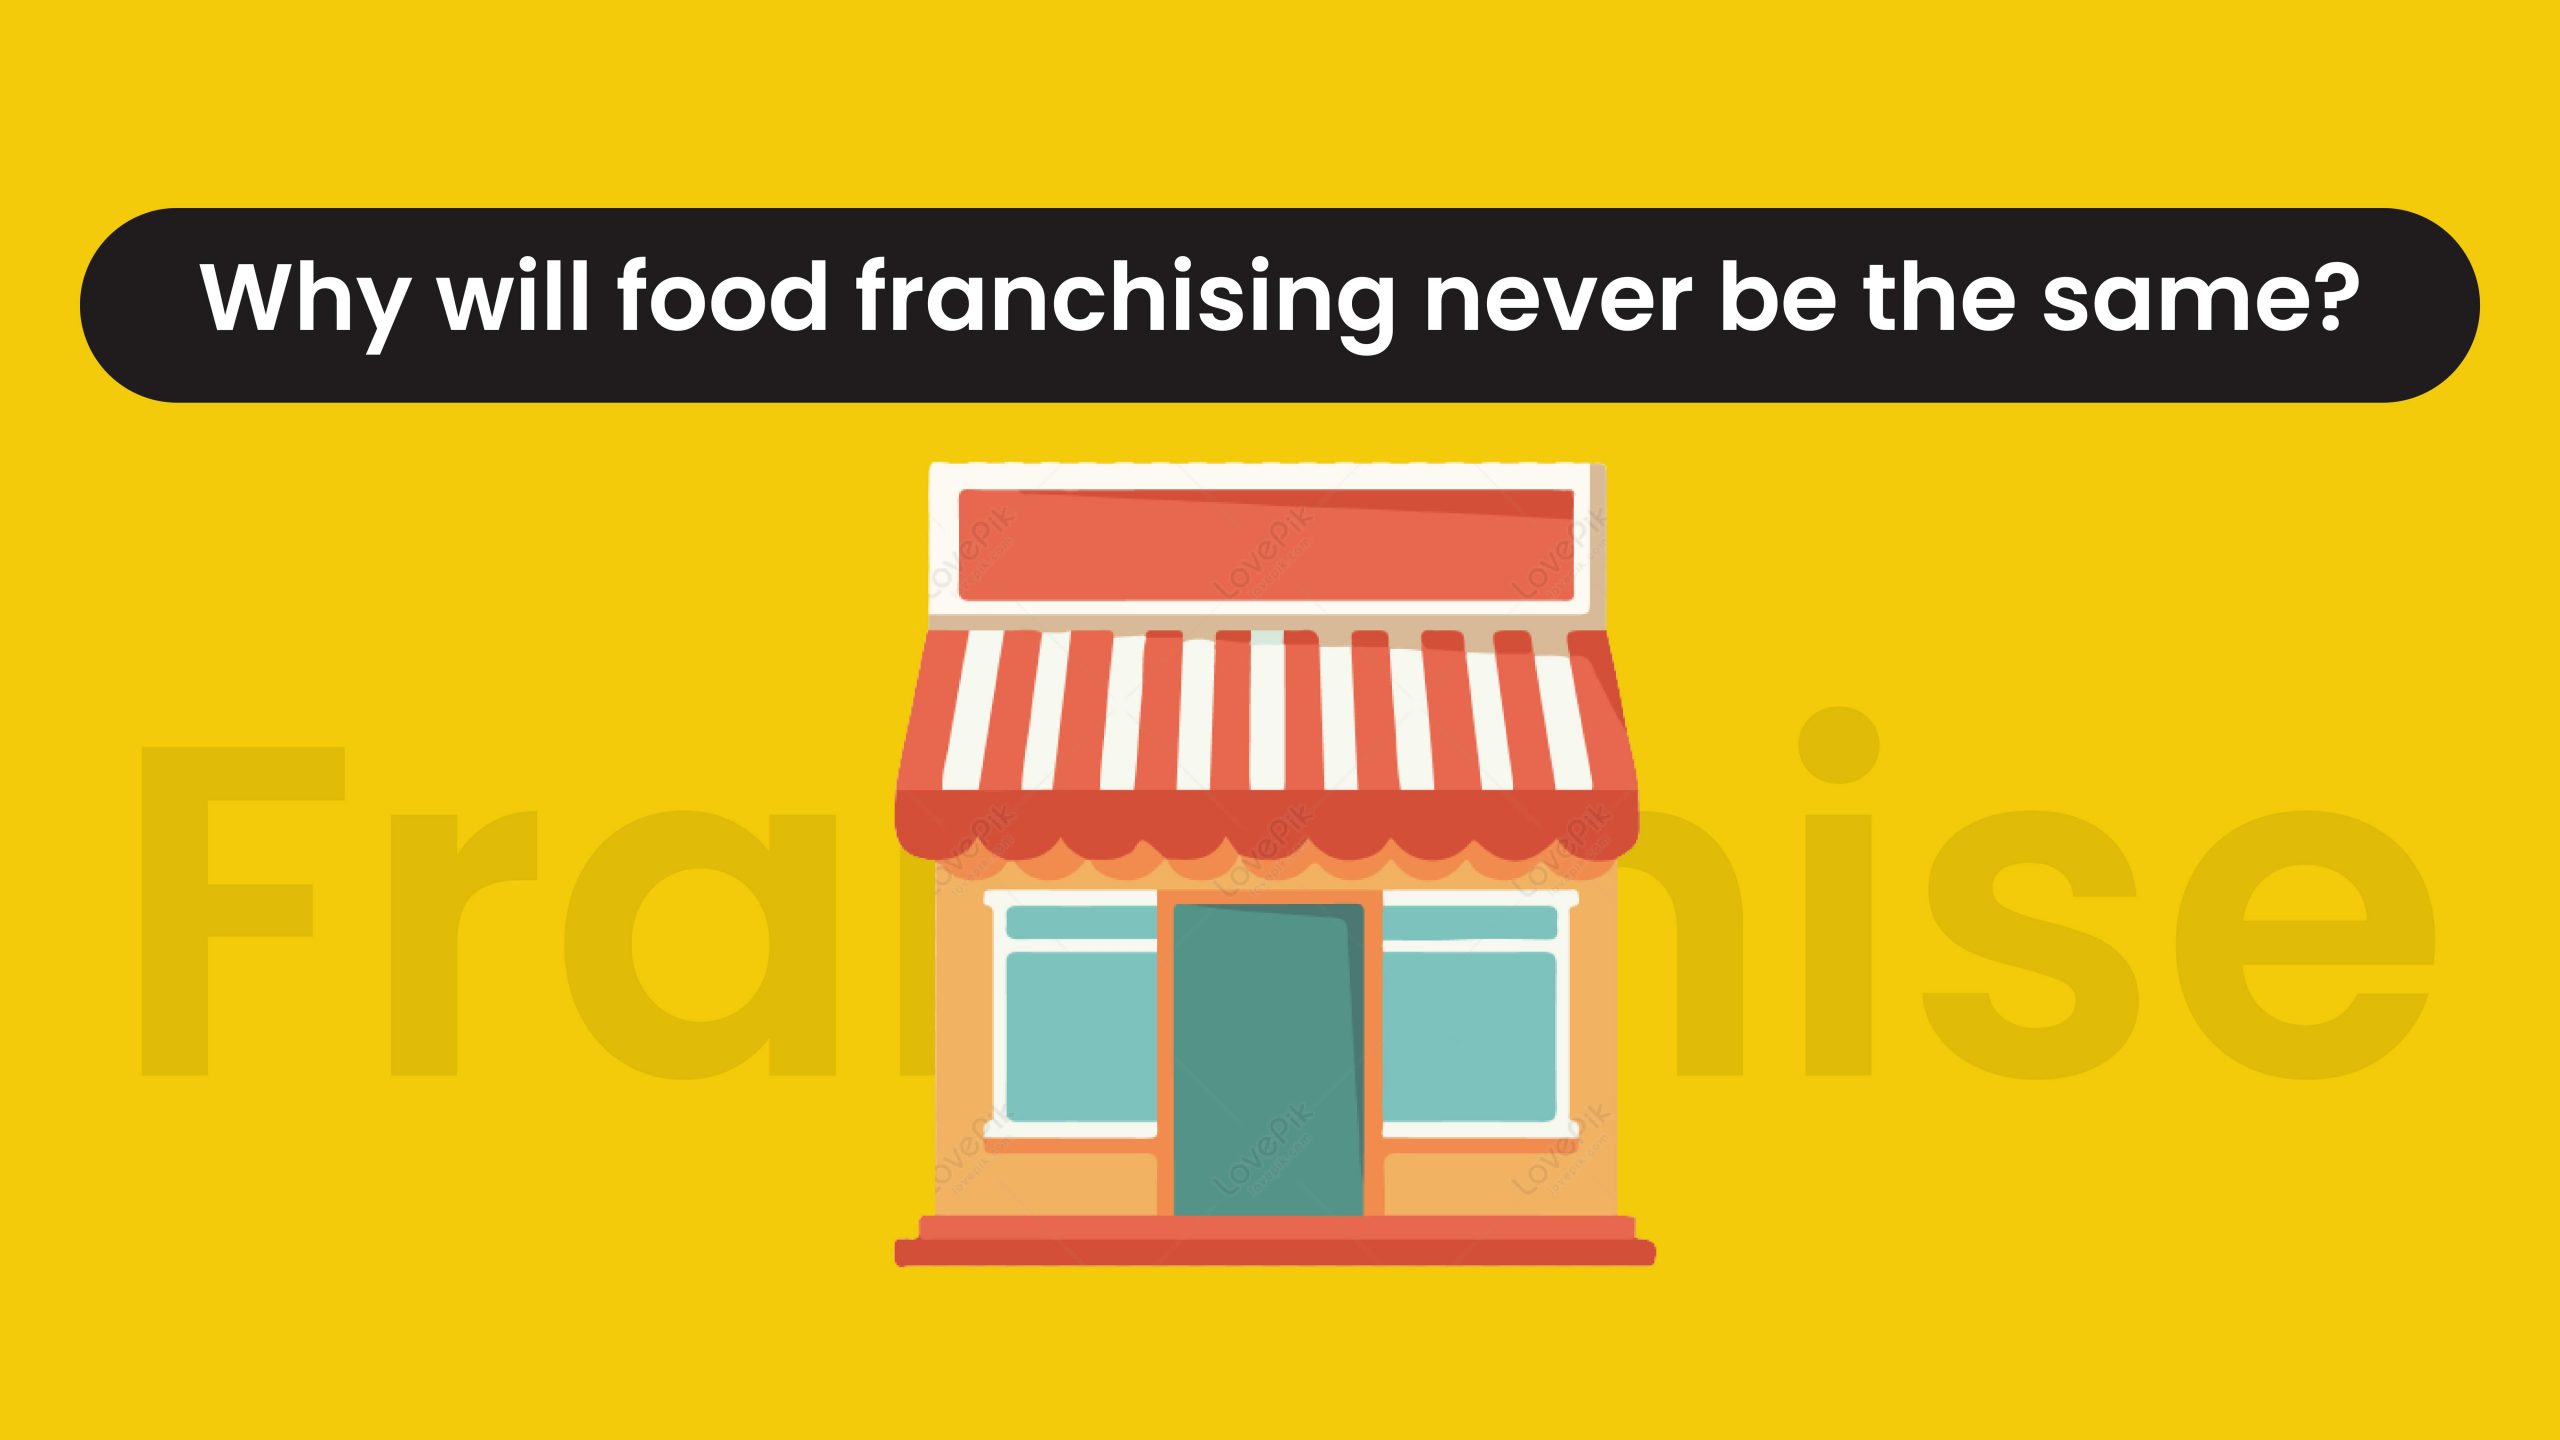 Why will food franchising never be the same?